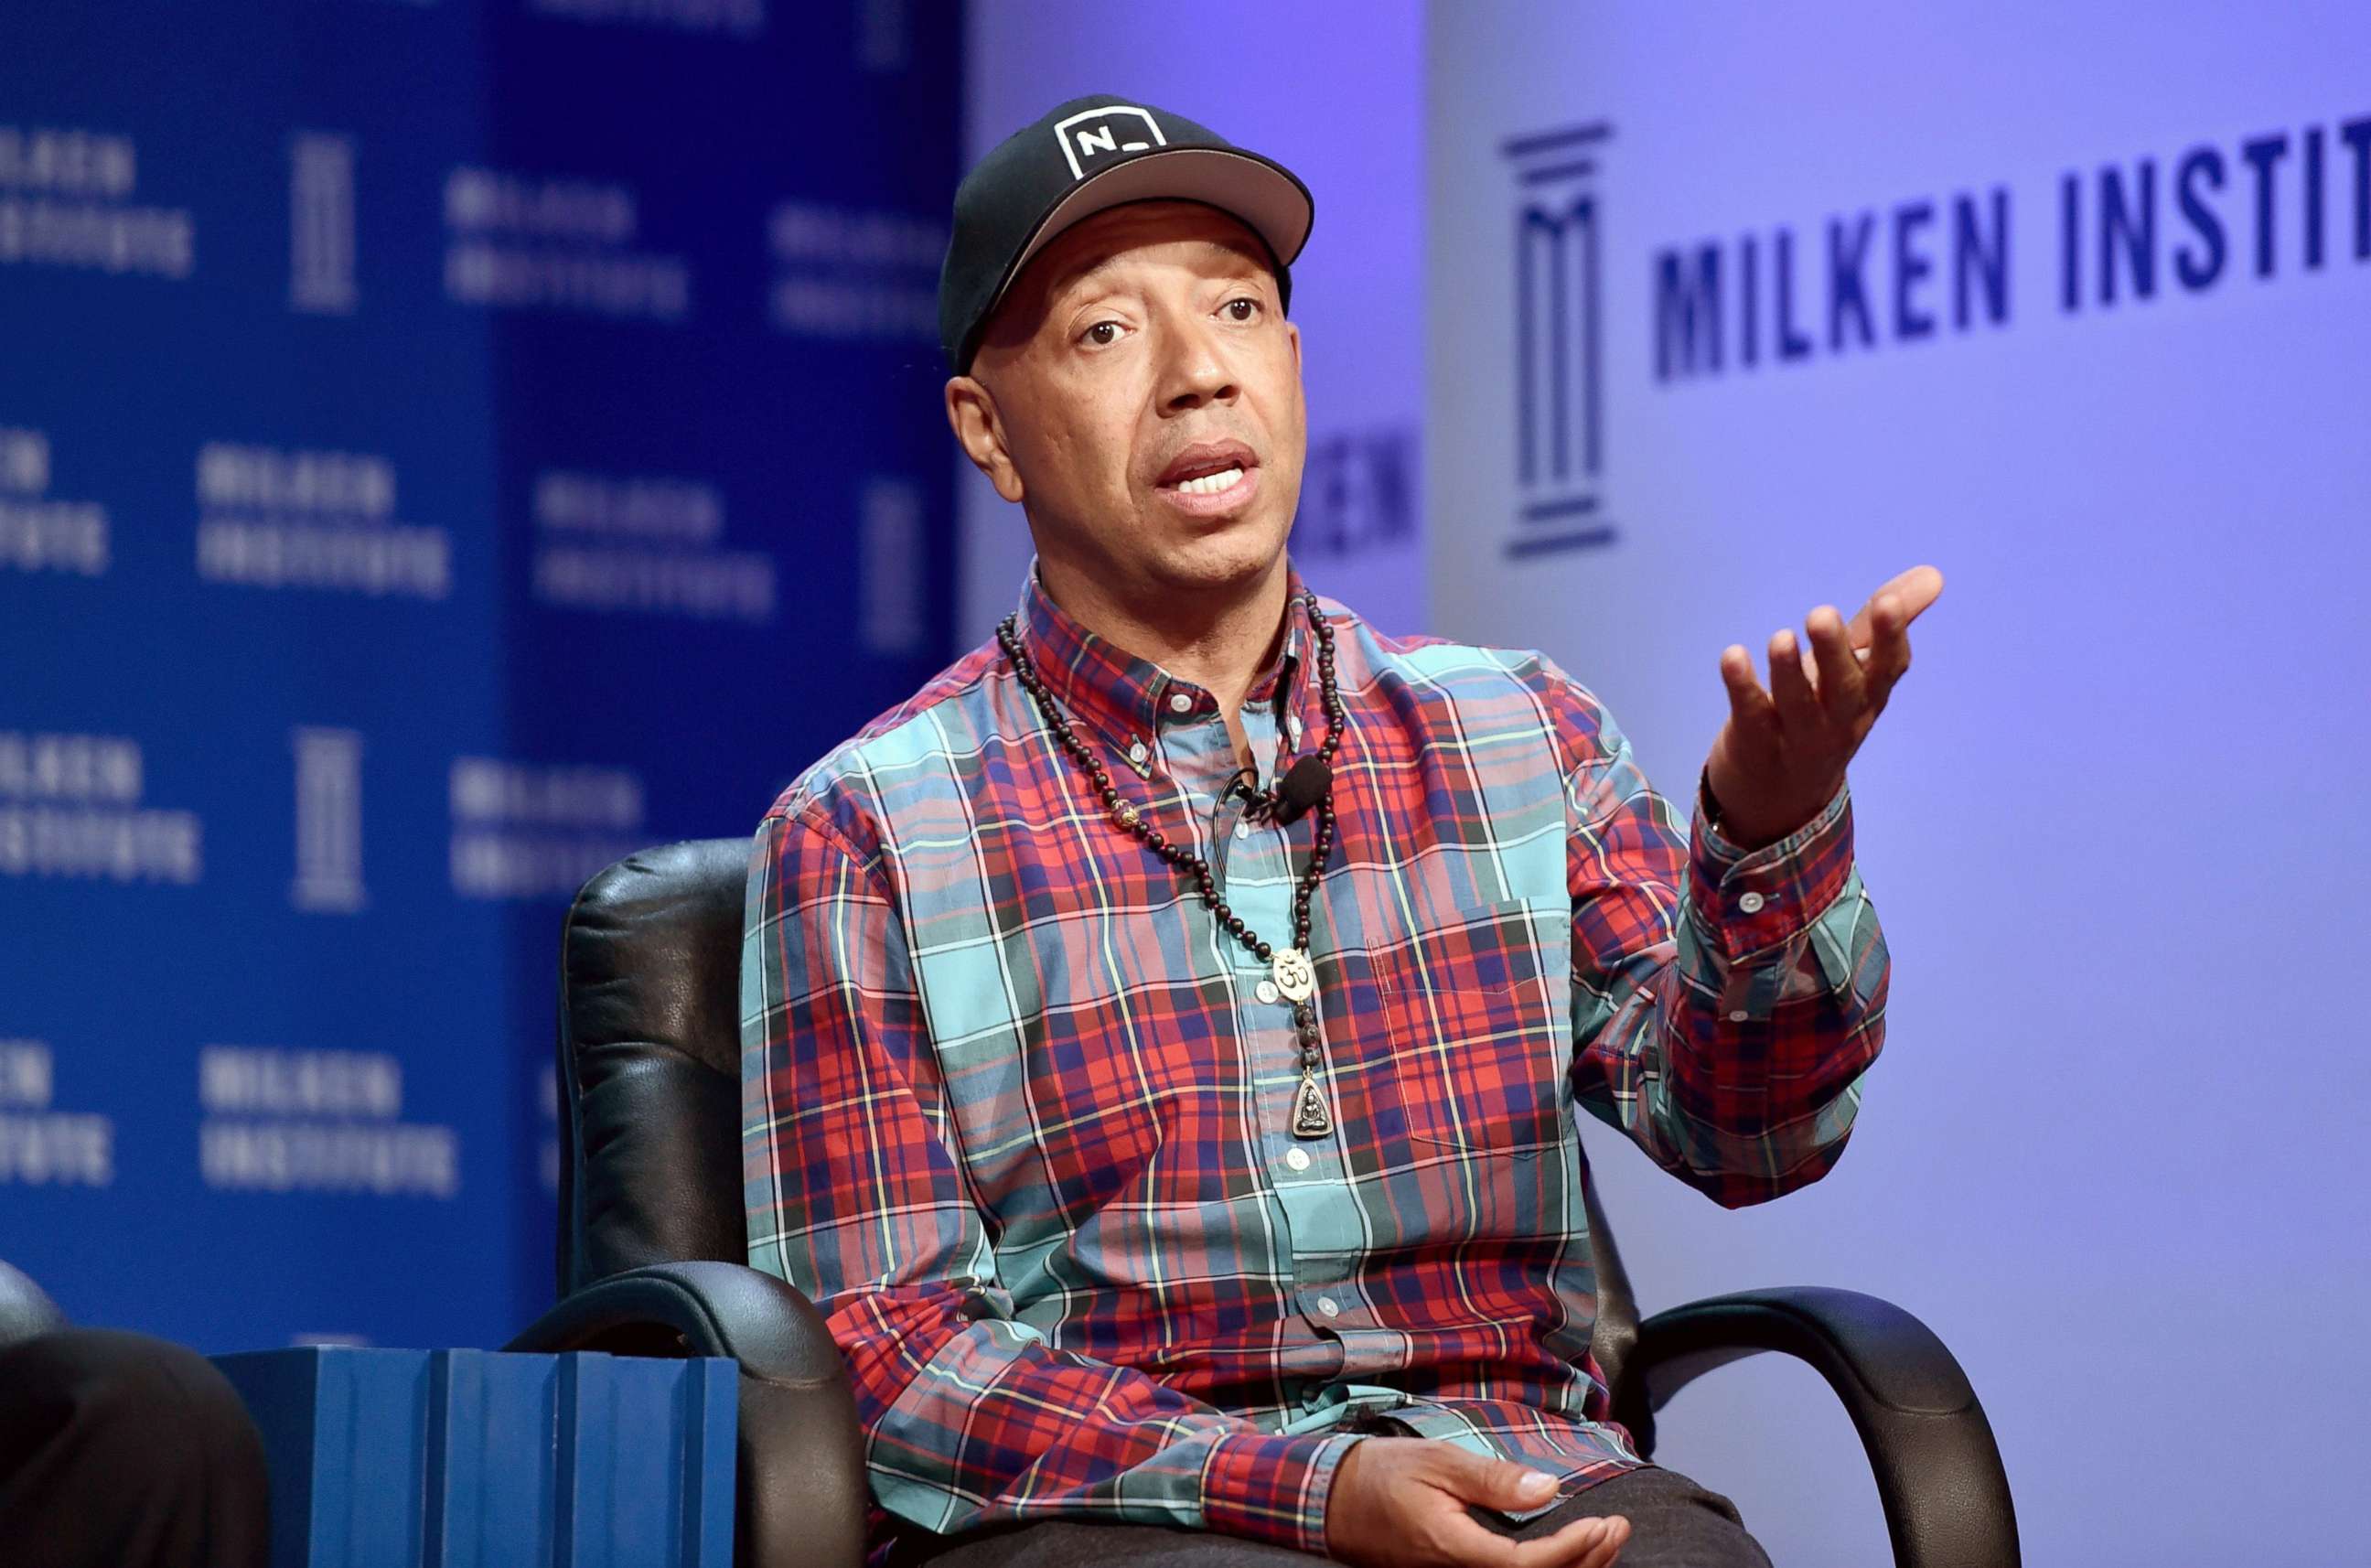 PHOTO: Russell Simmons speaks onstage during an event at the Beverly Hilton in Beverly Hills, Calif., May 2, 2016.